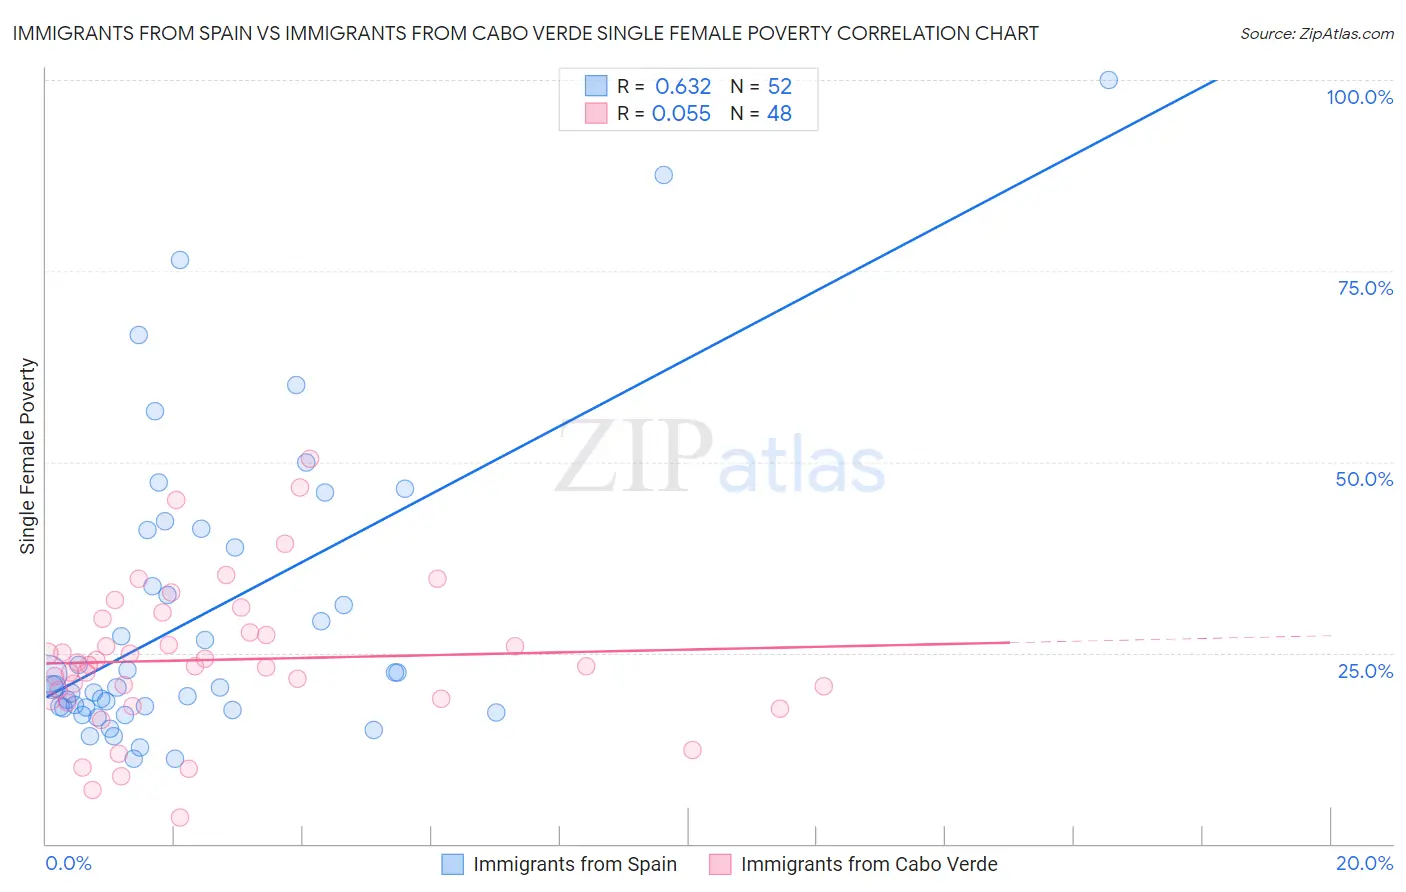 Immigrants from Spain vs Immigrants from Cabo Verde Single Female Poverty